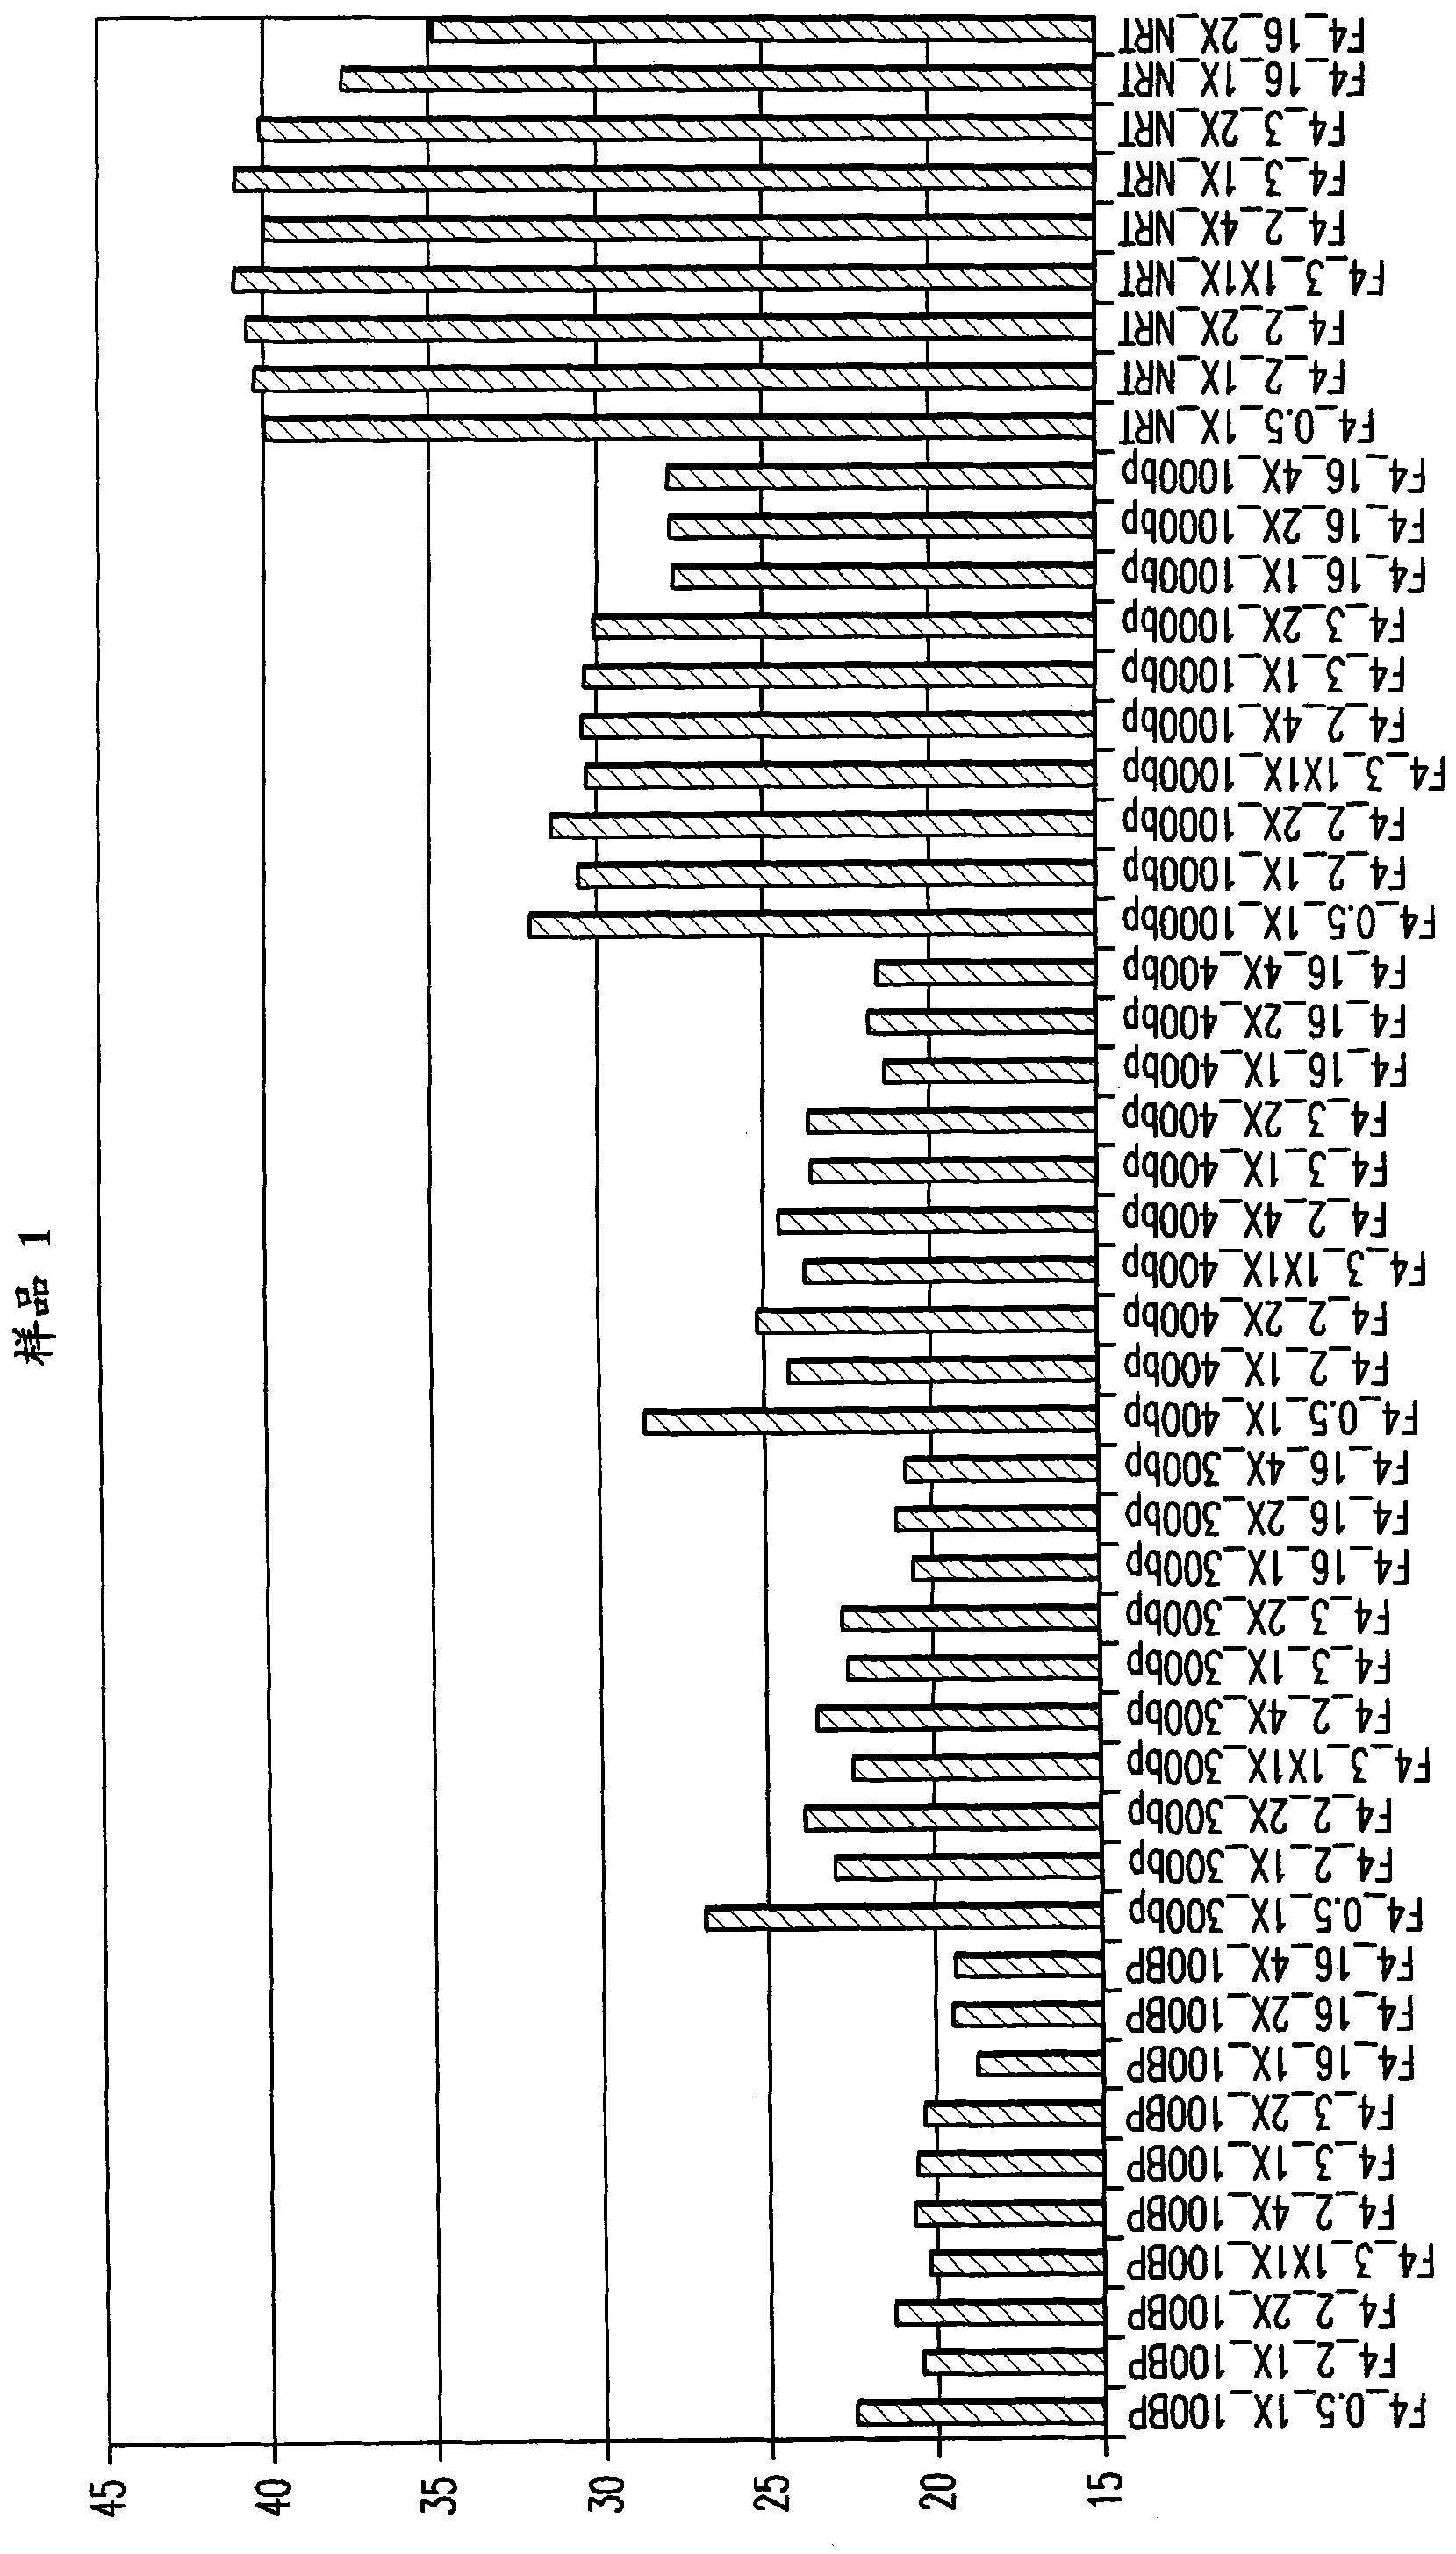 Methods for isolating long fragment rna from fixed samples